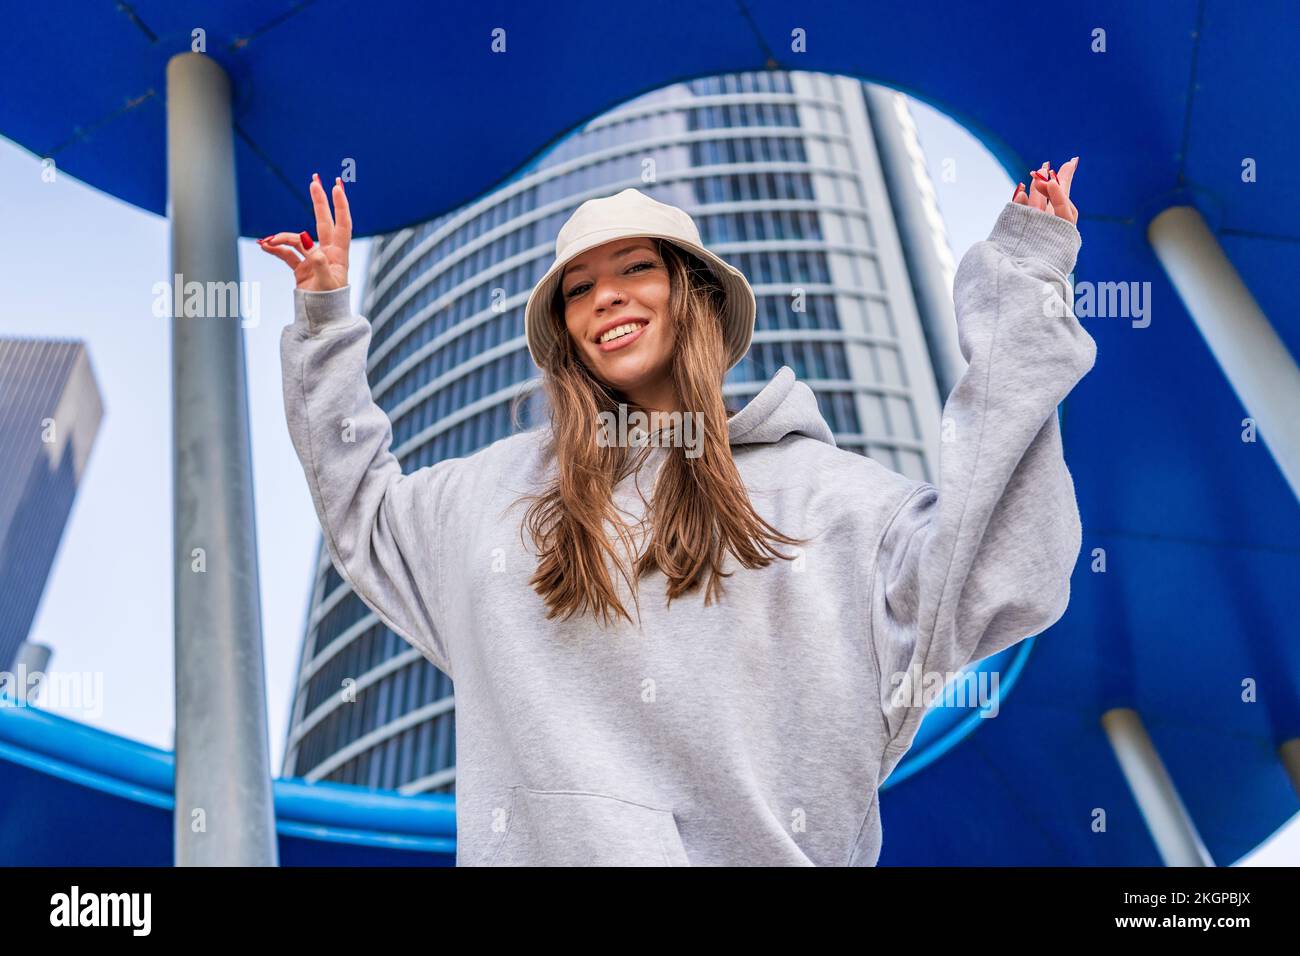 Happy woman standing with arms raised in front of building Stock Photo